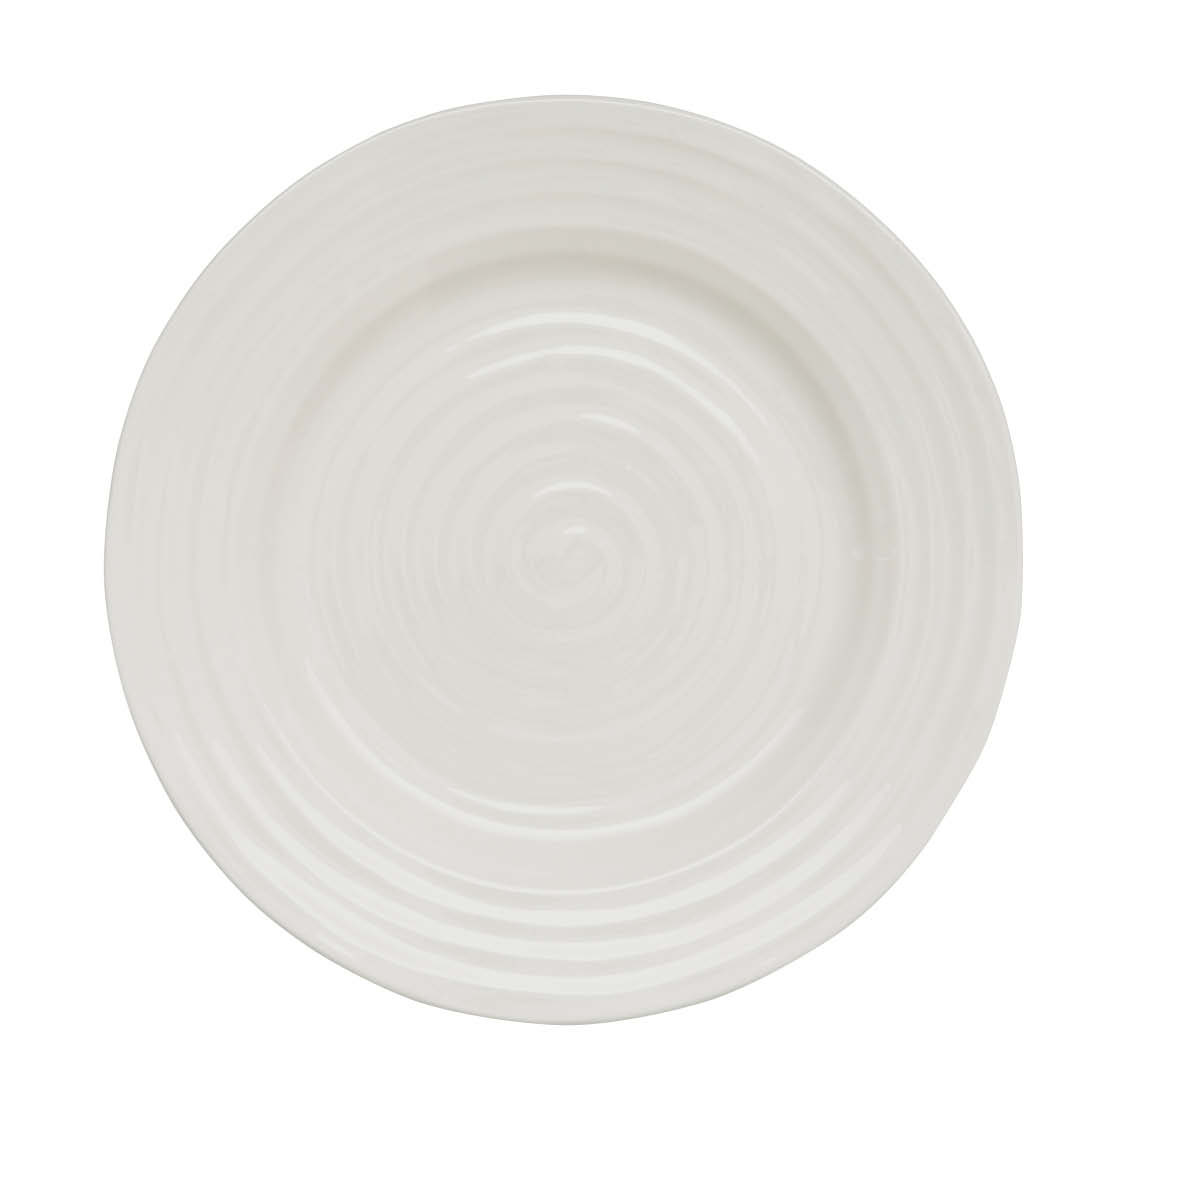 Sophie Conran Set of 4 Side Plates, White image number null